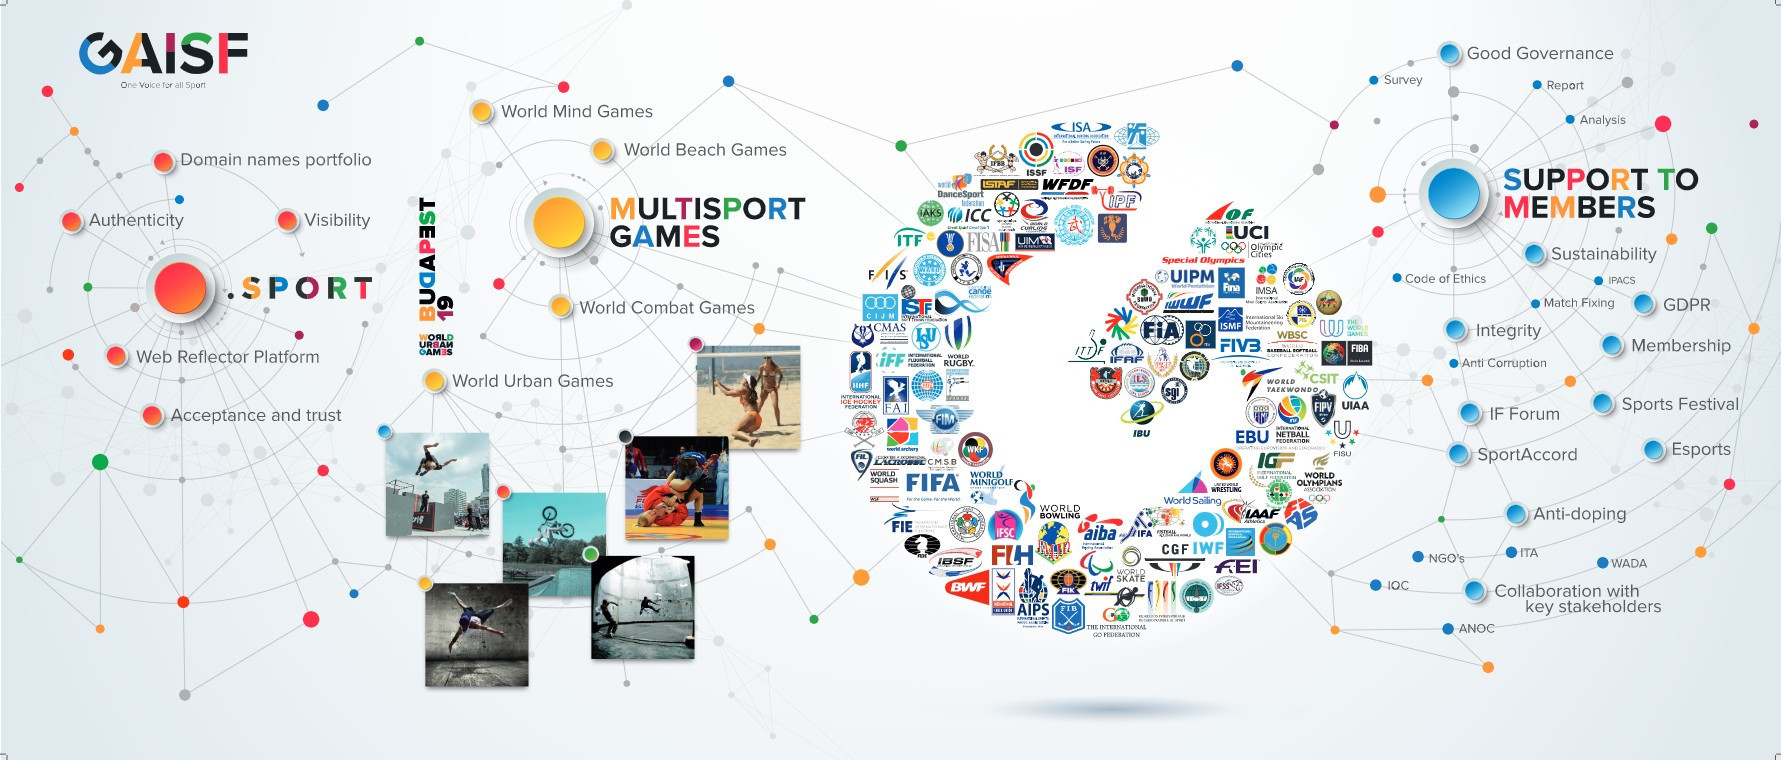 GAISF's assets will be distributed among several different parties following the dissolution, including SportAccord ©GAISF